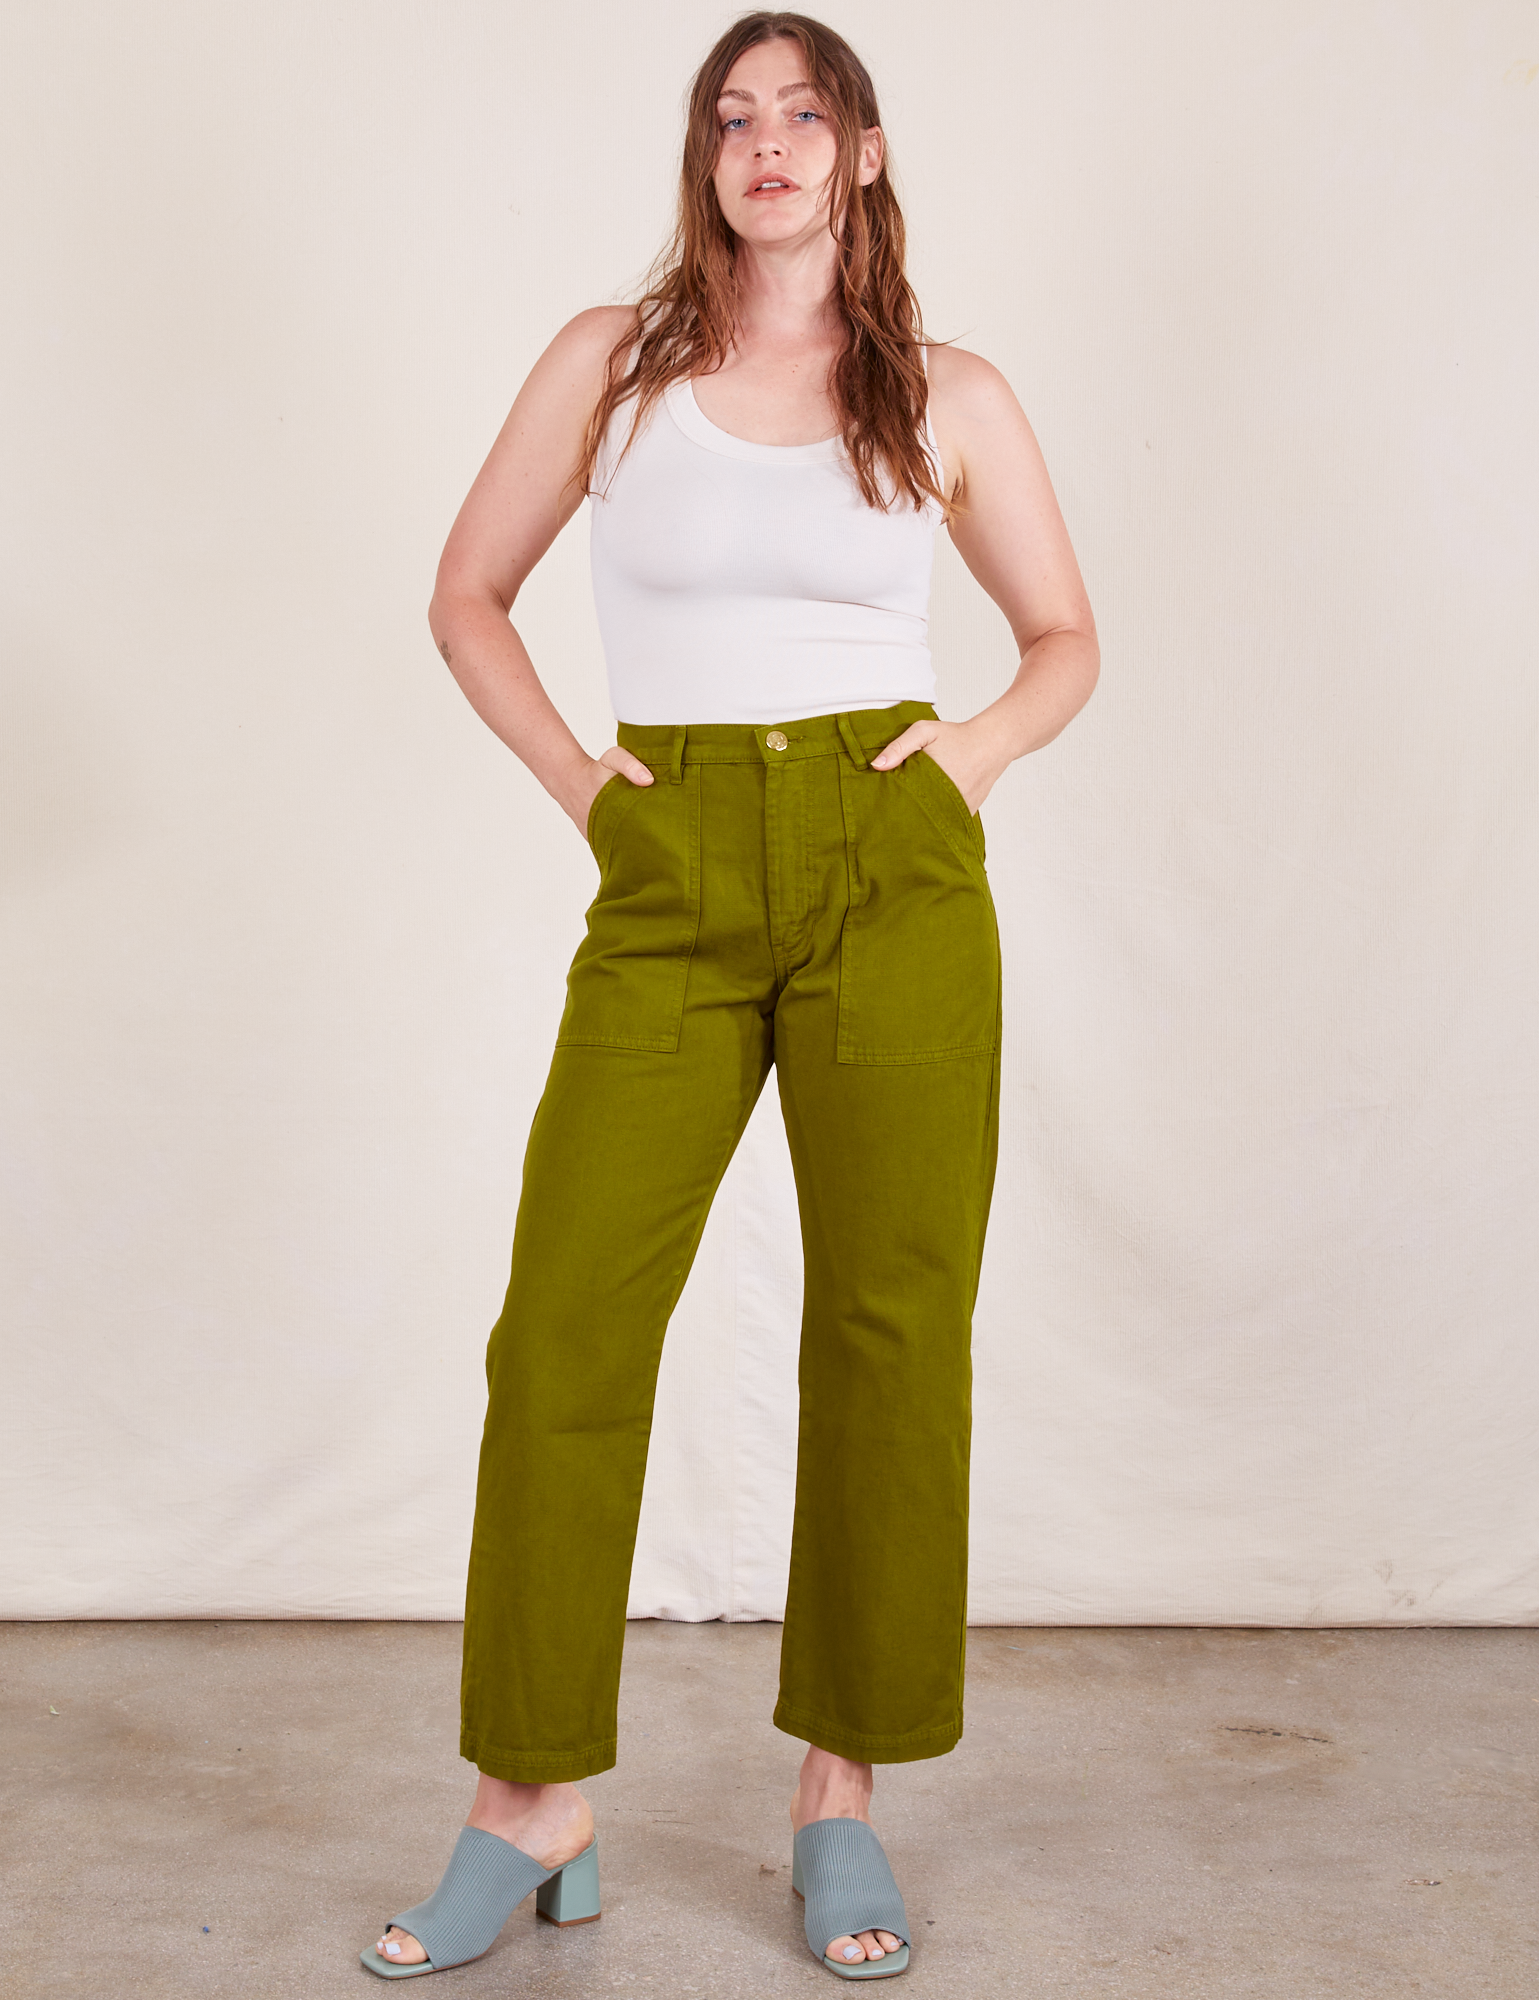 Allison is 5&#39;10&quot; and wearing S Work Pants in Olive Green paired with vintage off-white Tank Top